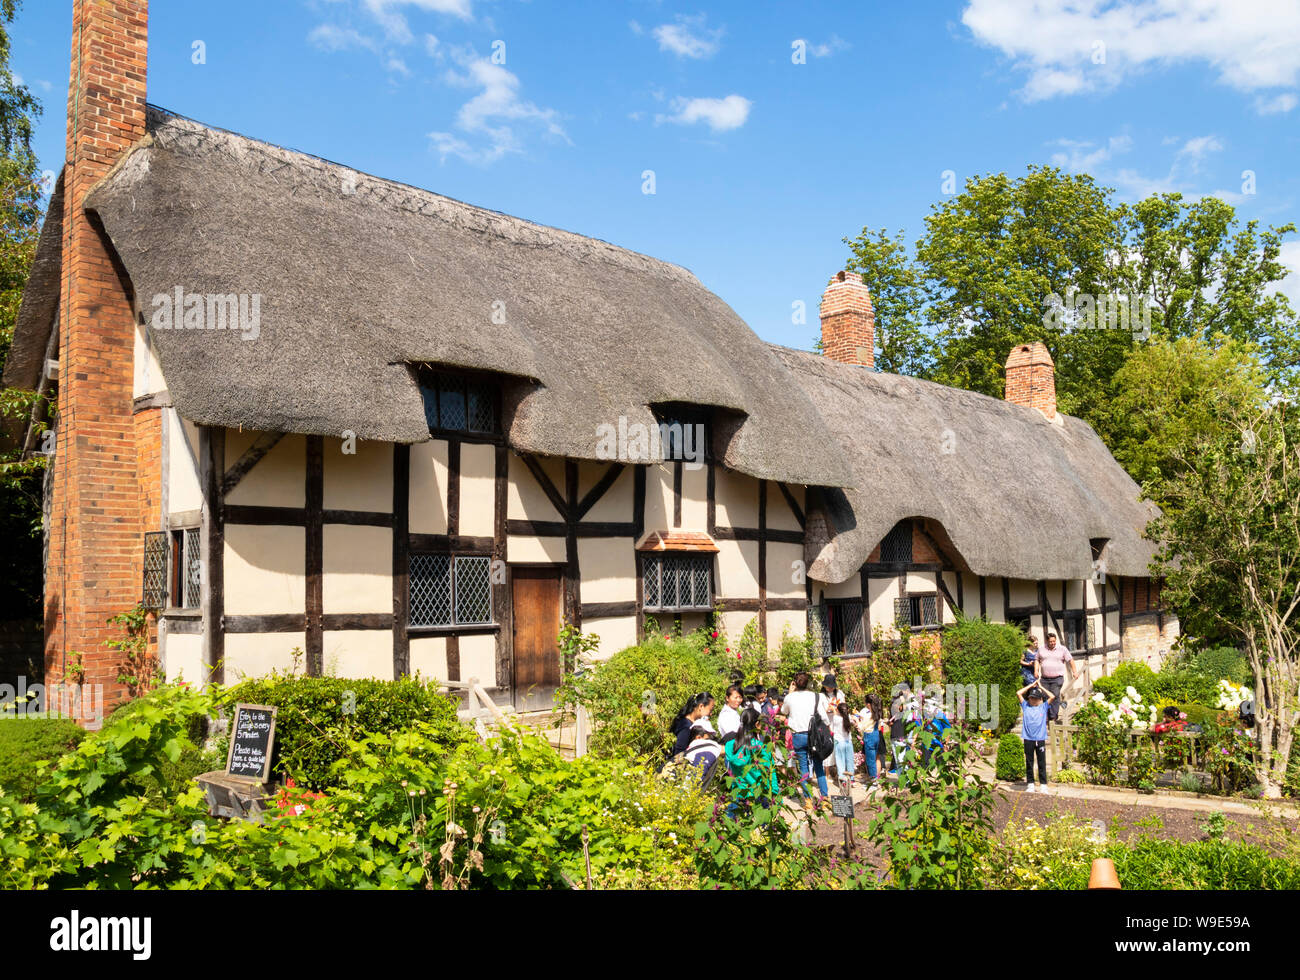 Anne Hathaway's cottage a thatched cottage in a cottage garden Shottery near Stratford upon Avon Warwickshire England UK GB Europe Stock Photo